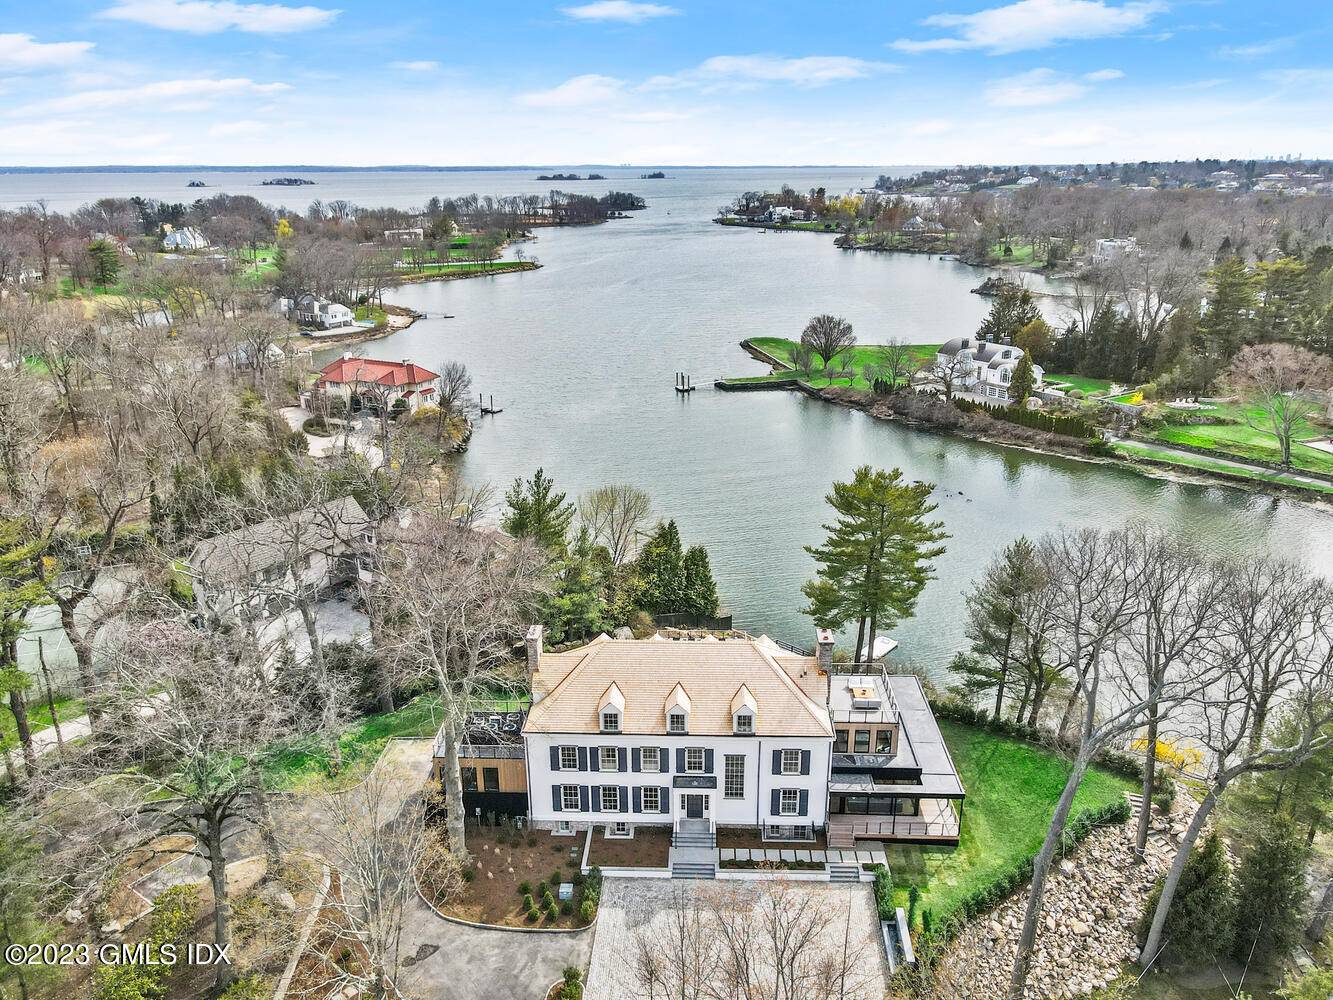 Capturing magnificent light and striking water vistas, this resort like aerie sits high above Indian Harbor on 292' of private water frontage with a waterside entertaining deck, boathouse and floating ...